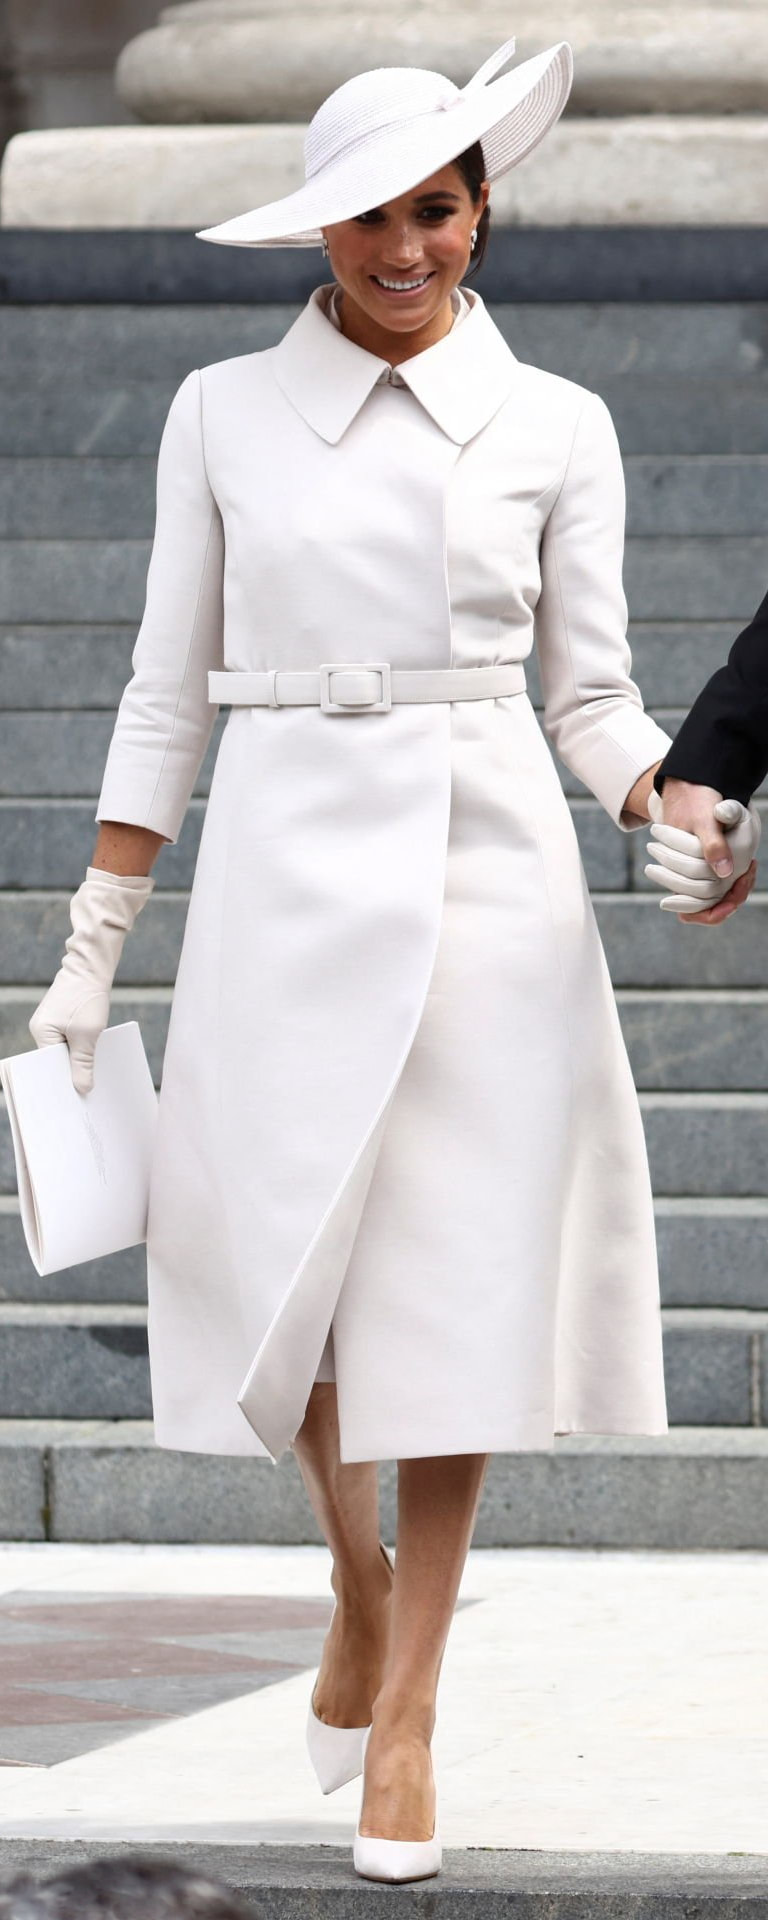 Dior Haute Couture Trench Coat in Greige - Meghan Markle's Outerwear -  Meghan's Fashion